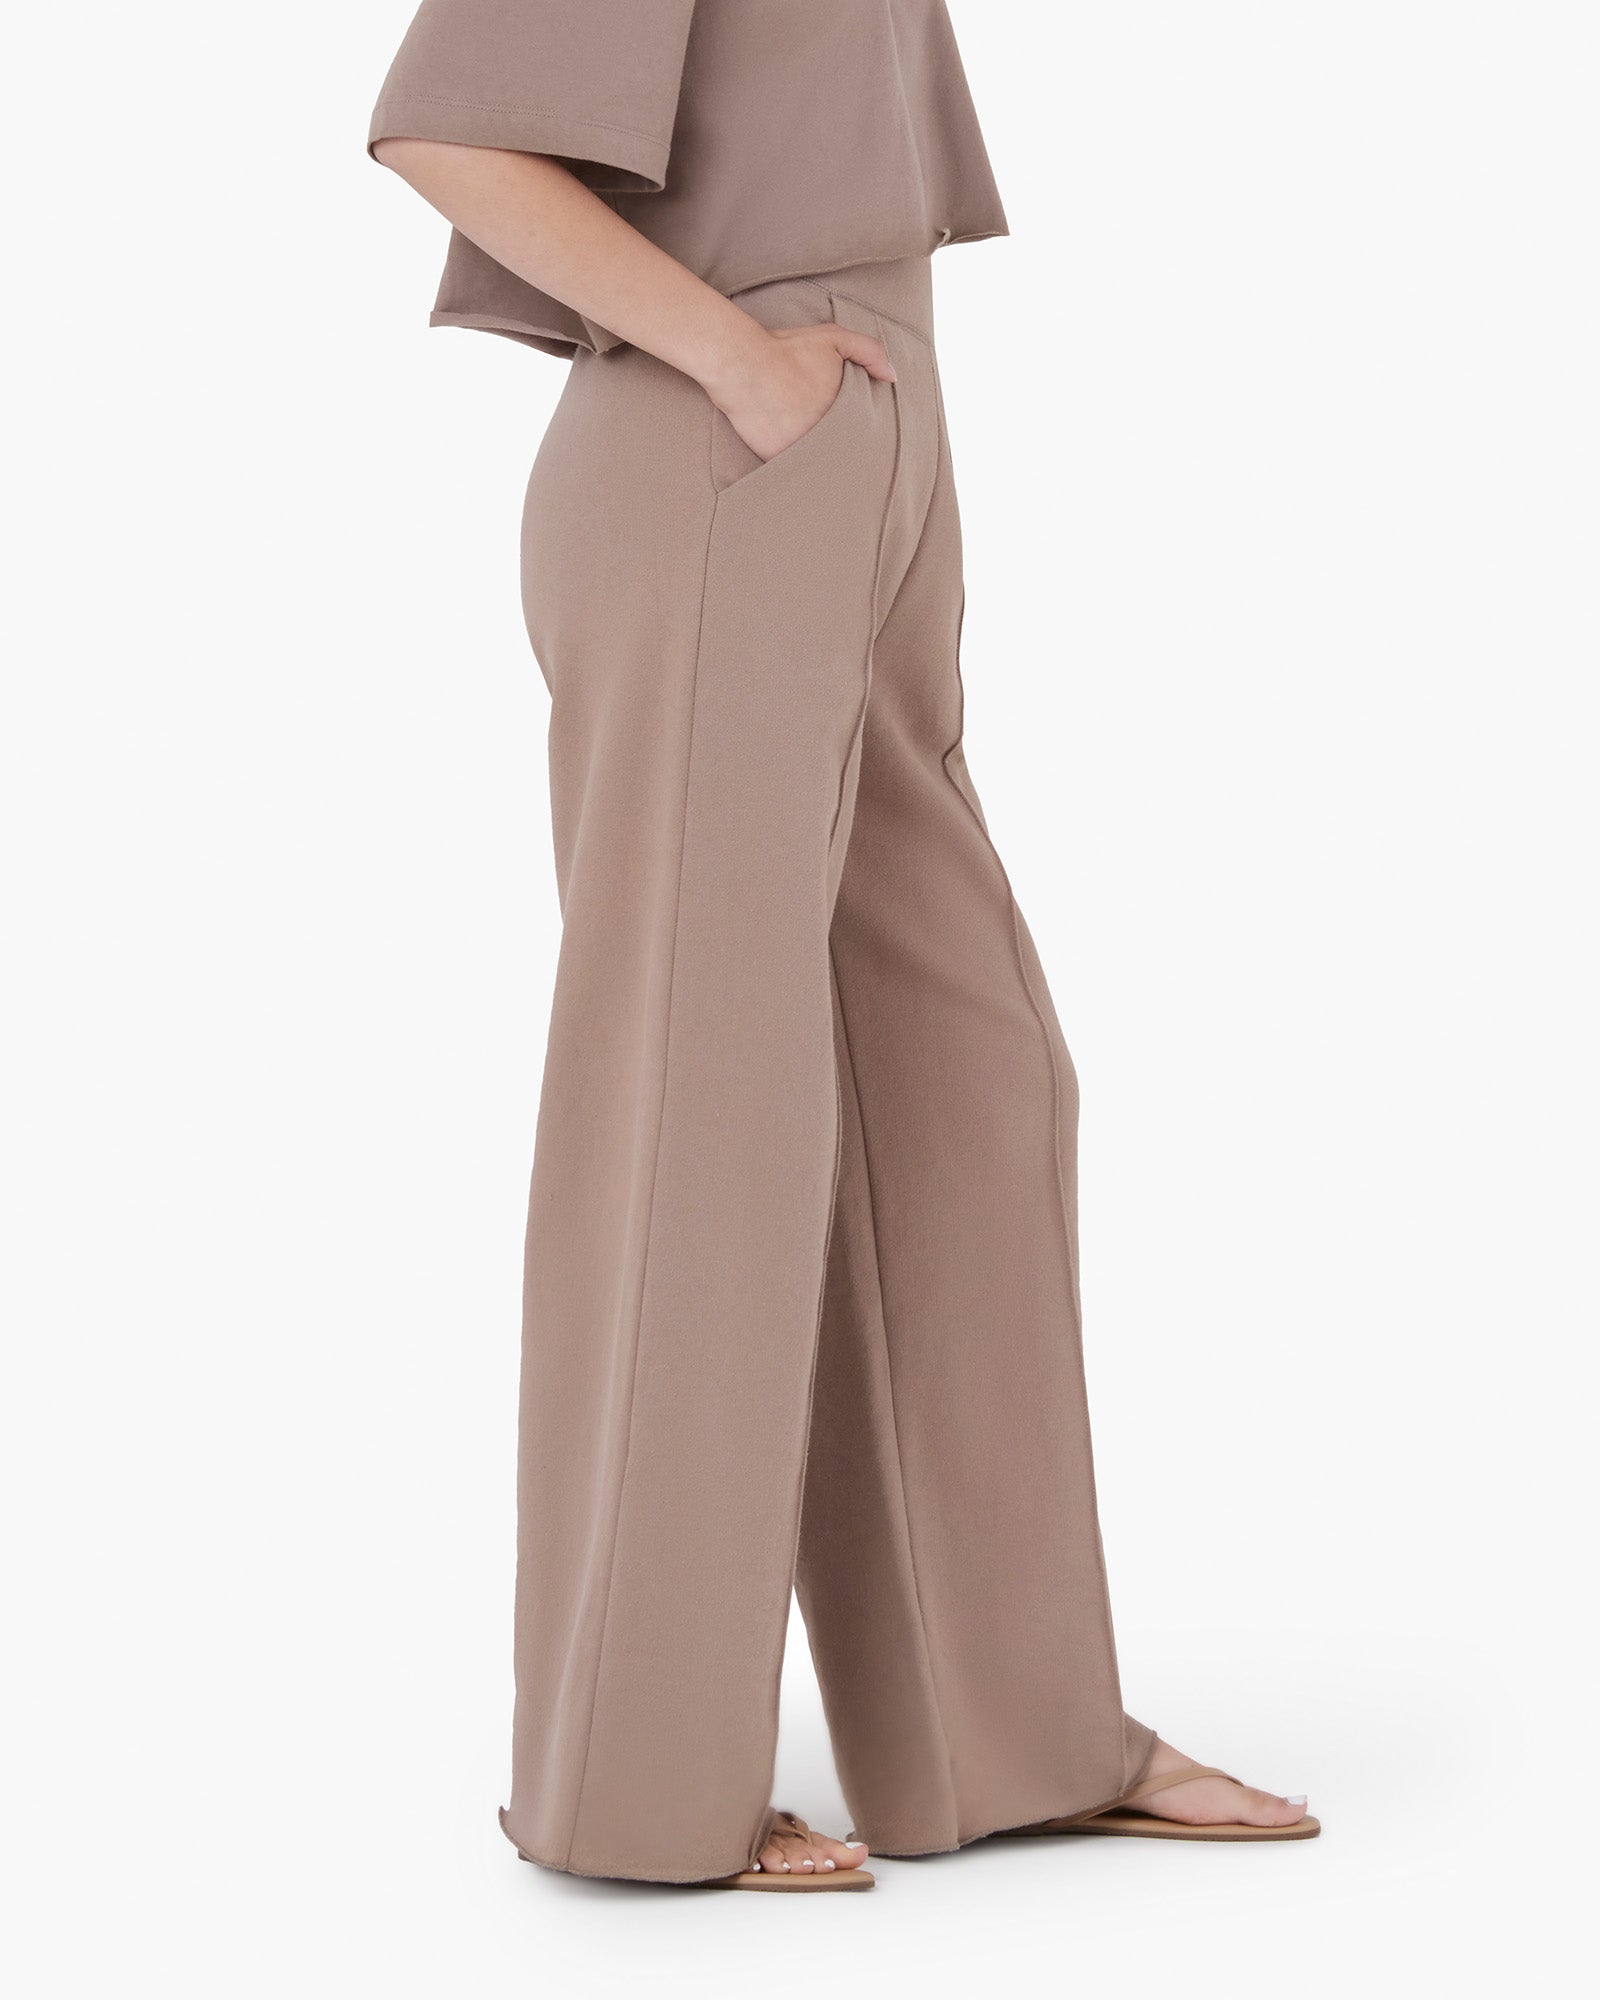 Grey Women's's's's's's's's's's's's's's's's's's's's's's TKEES Raw Edge Wide Leg Pants | OXTKFD528